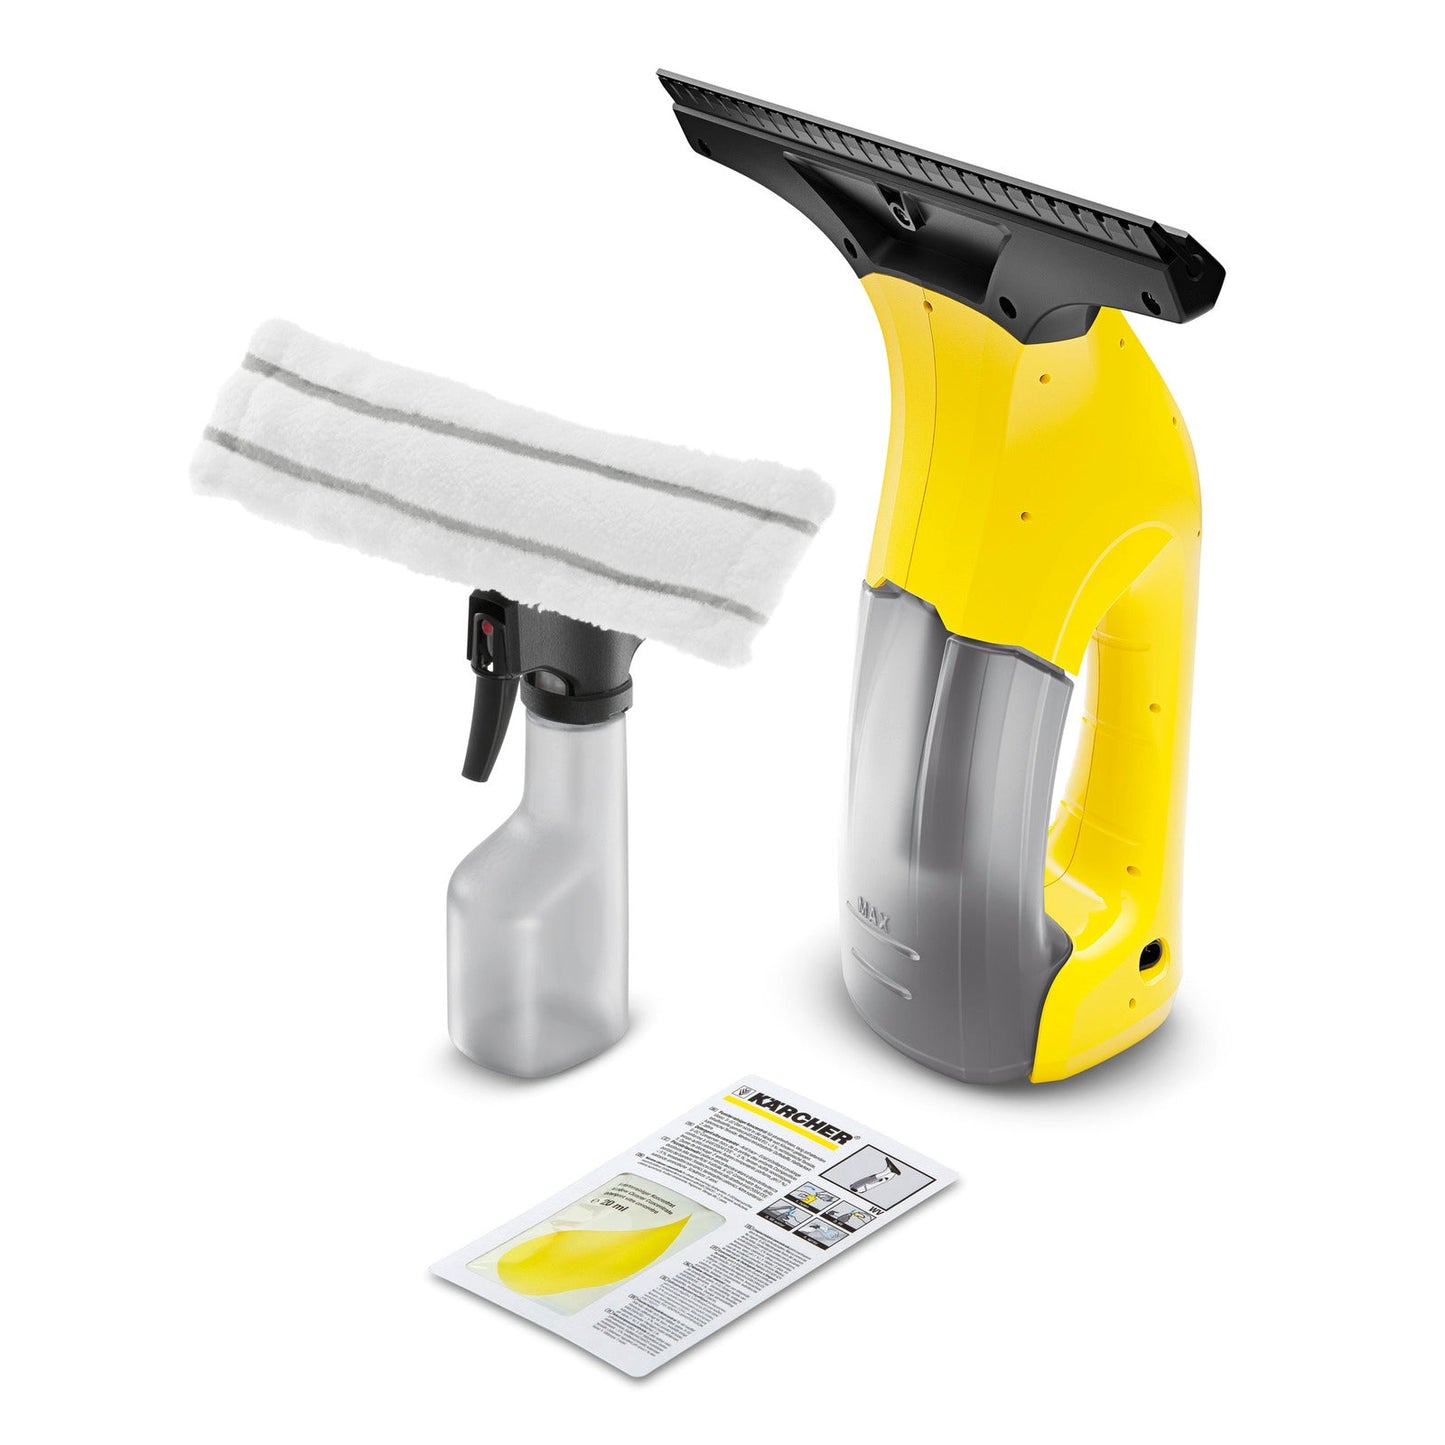 Cleaning KARCHER WV 1 WINDOW VAC